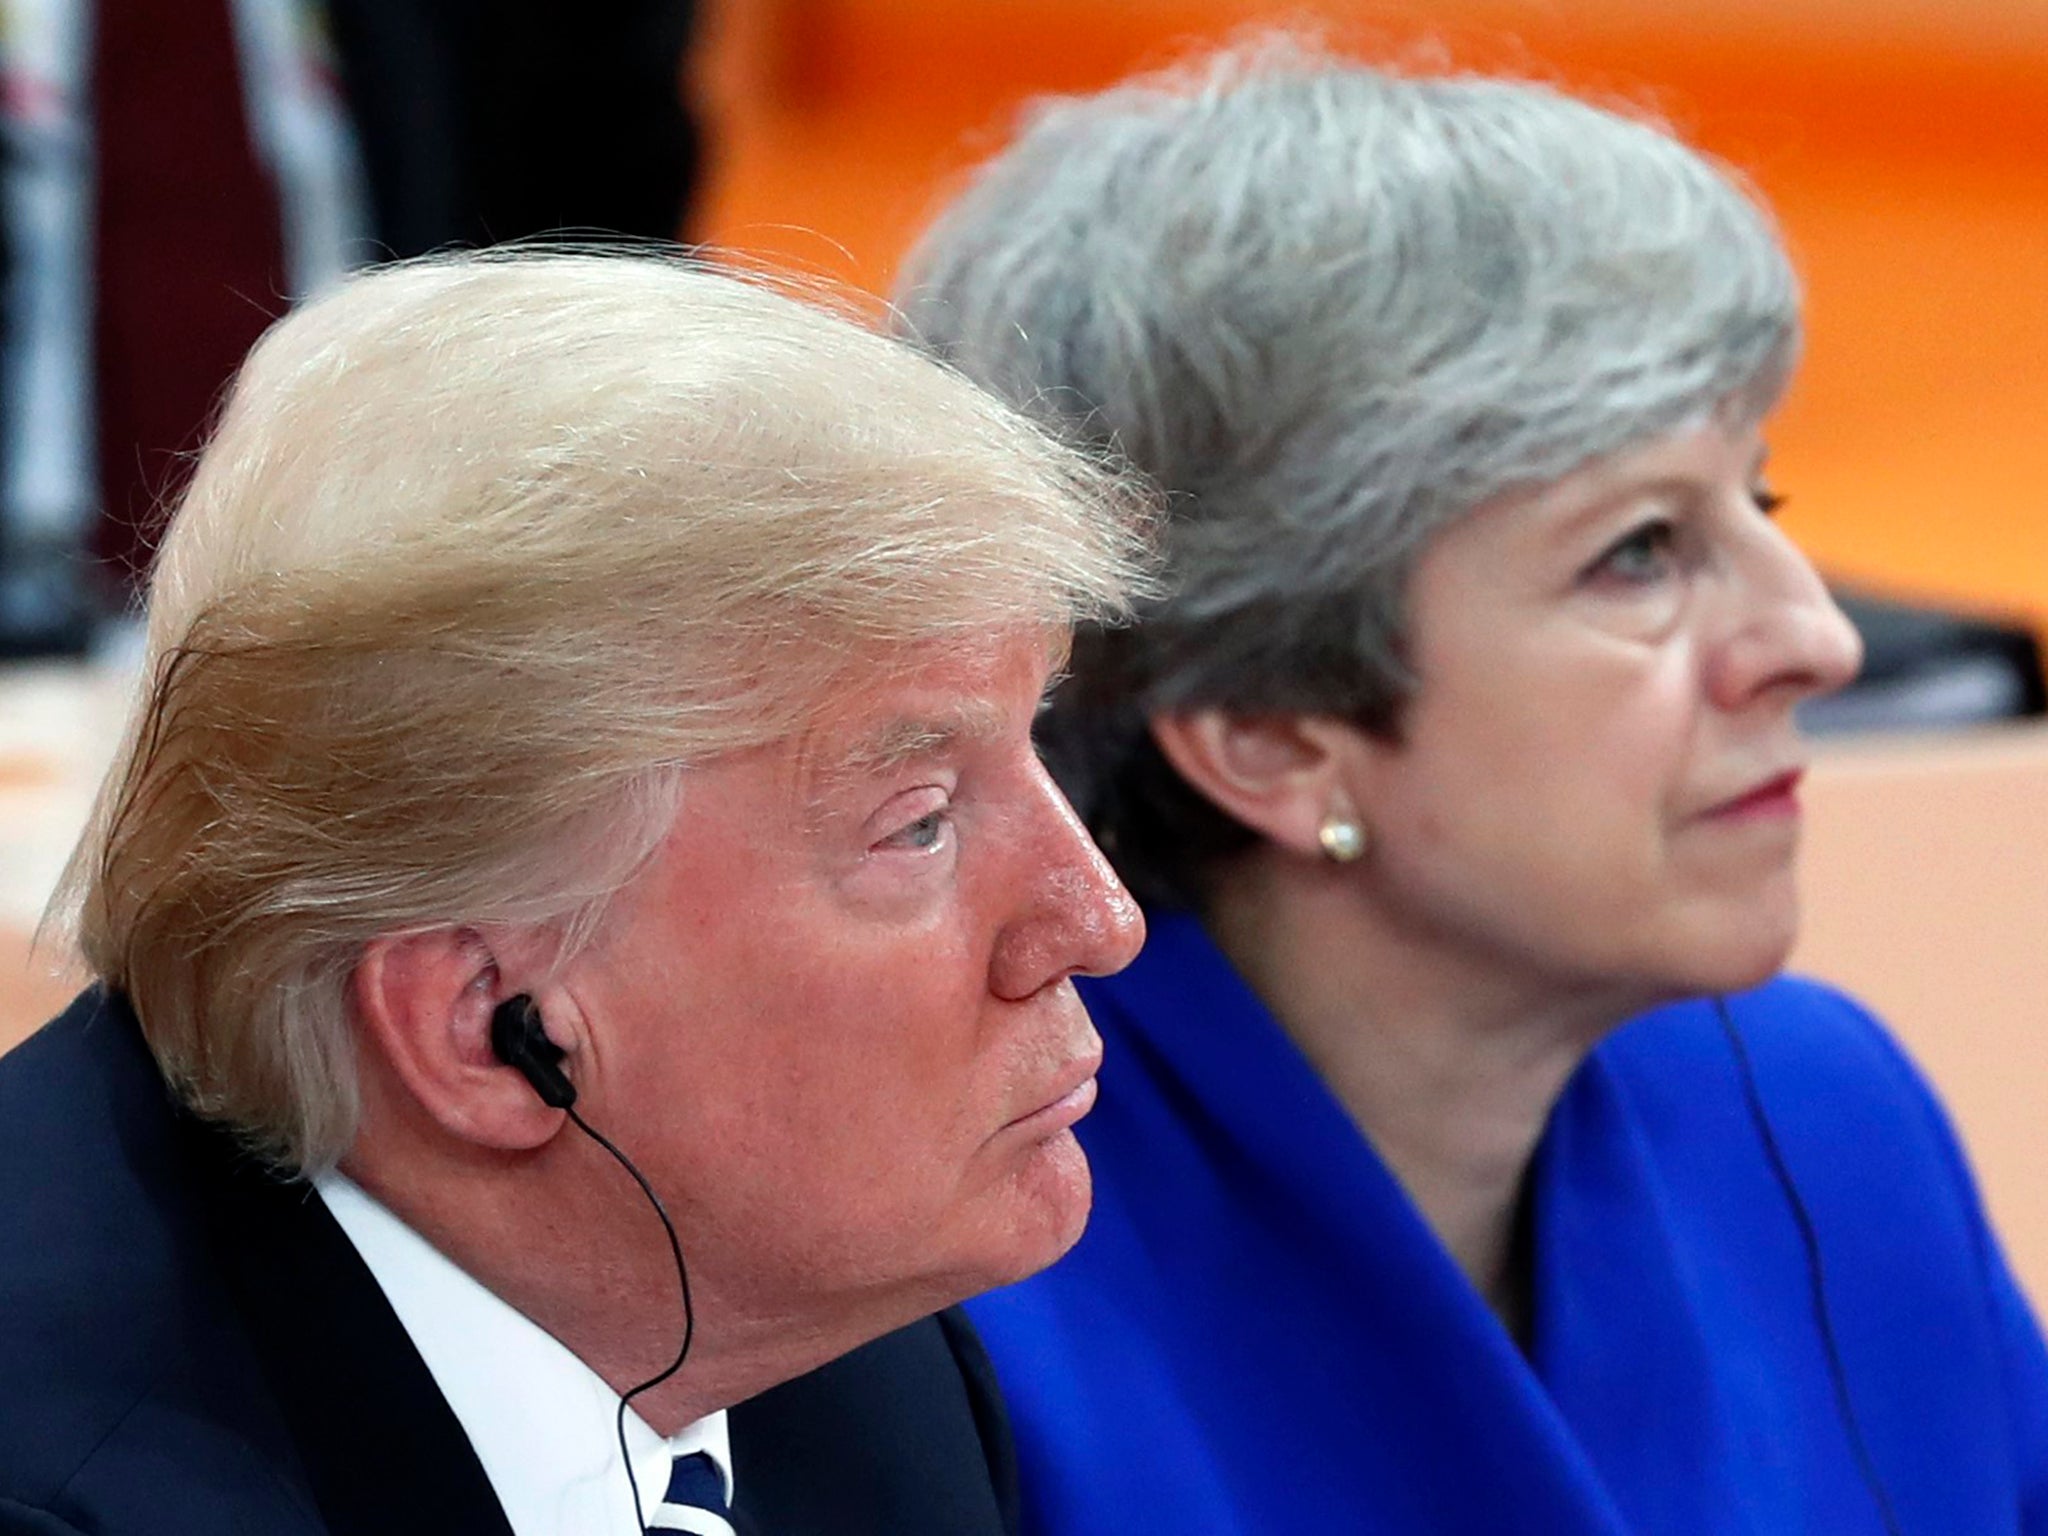 Trump and May seem to be on similarly rocky roads when it comes to their approval ratings